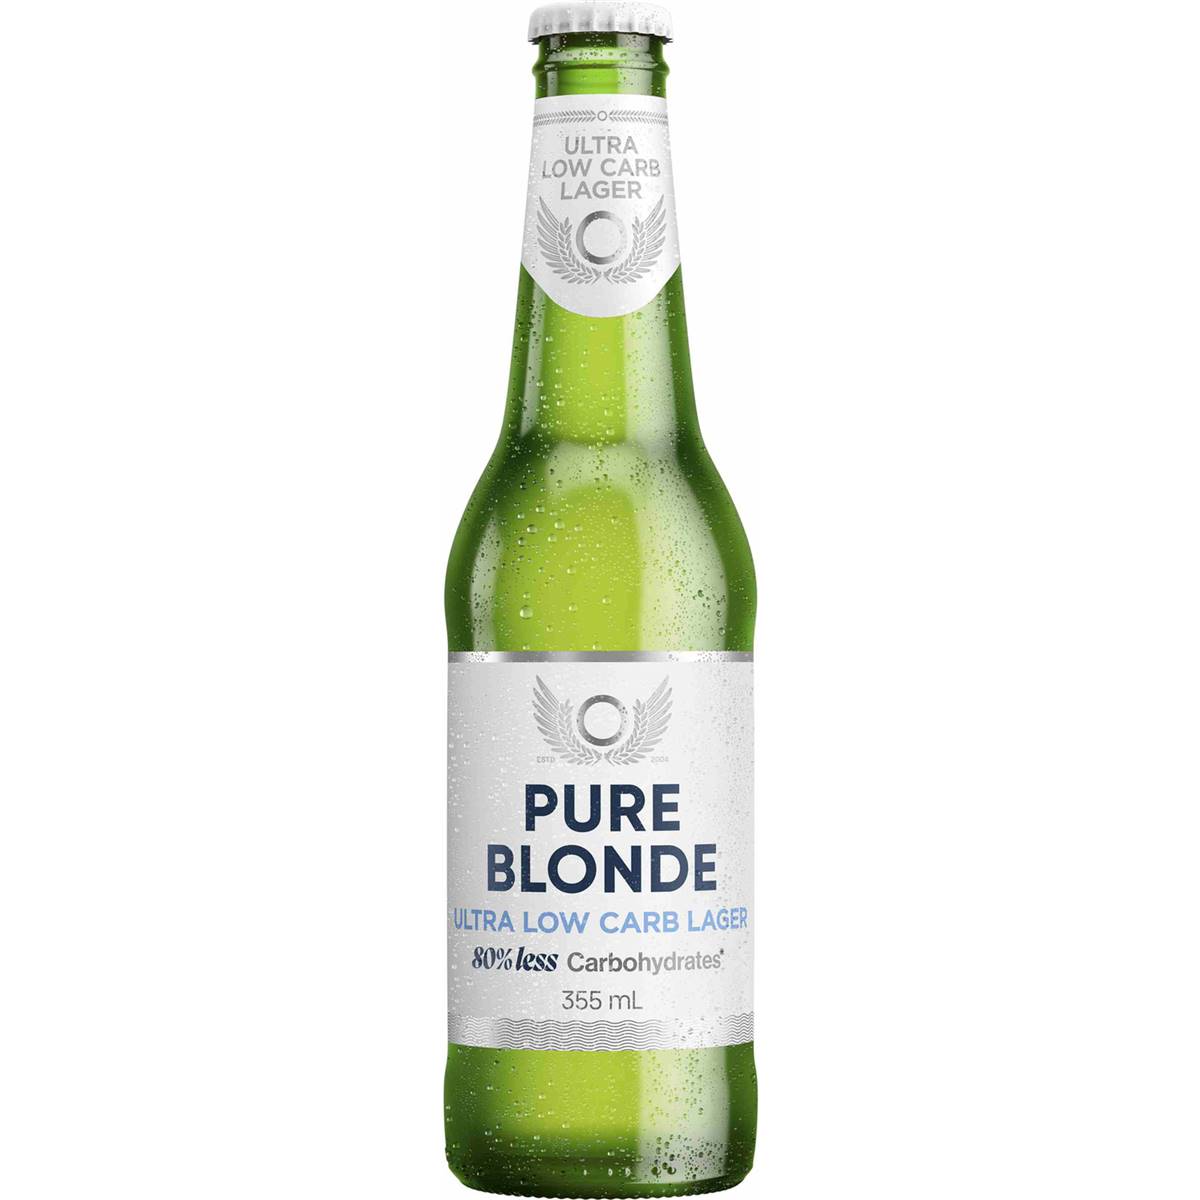 Calories in Pure Blonde Ultra Low Carb Lager Stubby